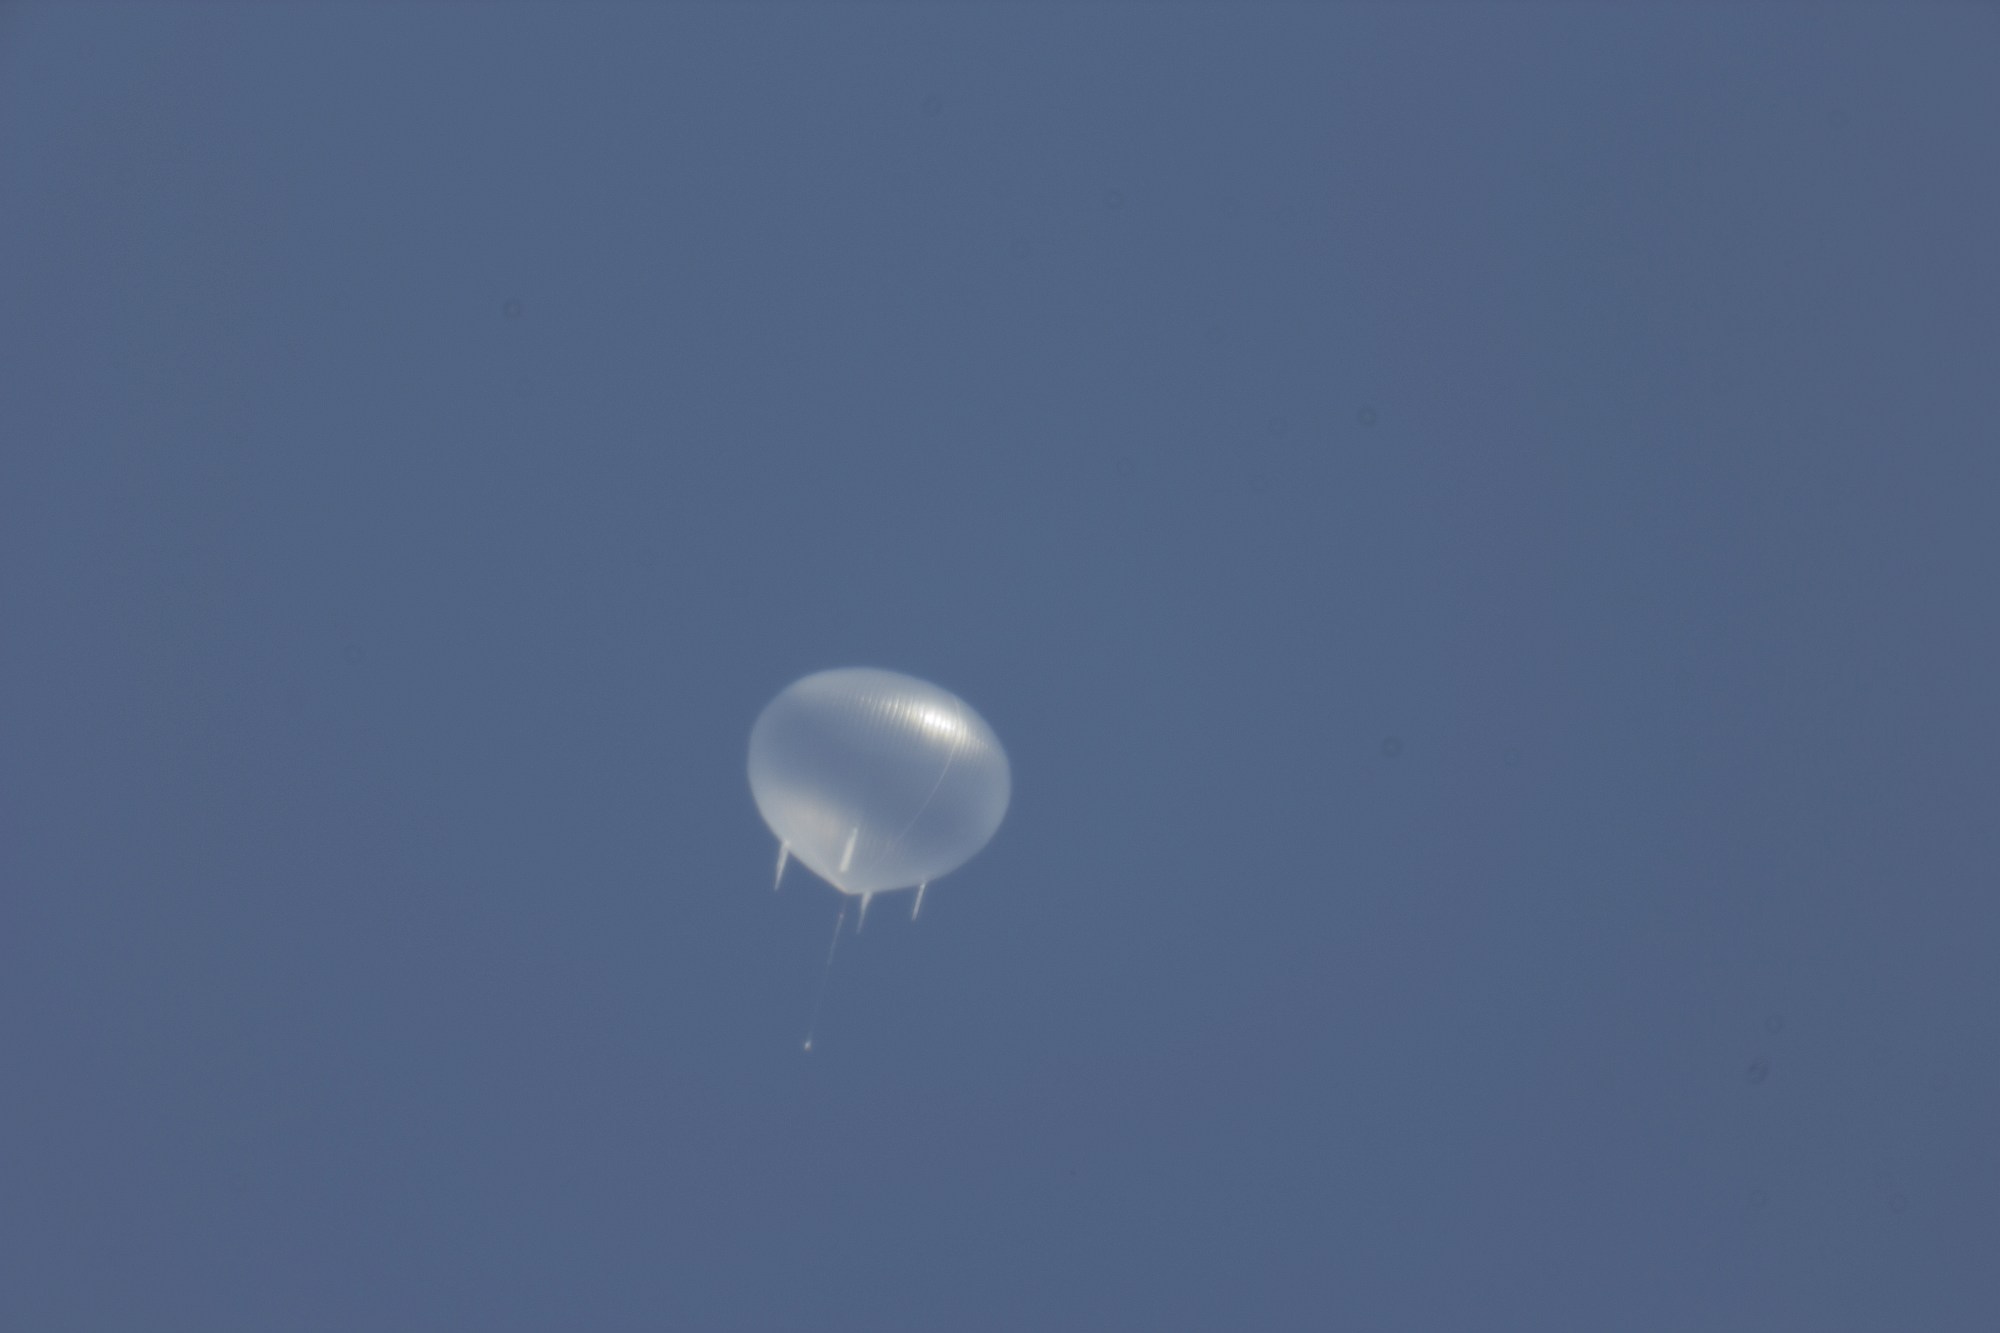 The view of the SMILE balloon at float altitude, fully expanded (Image: David McDonald)